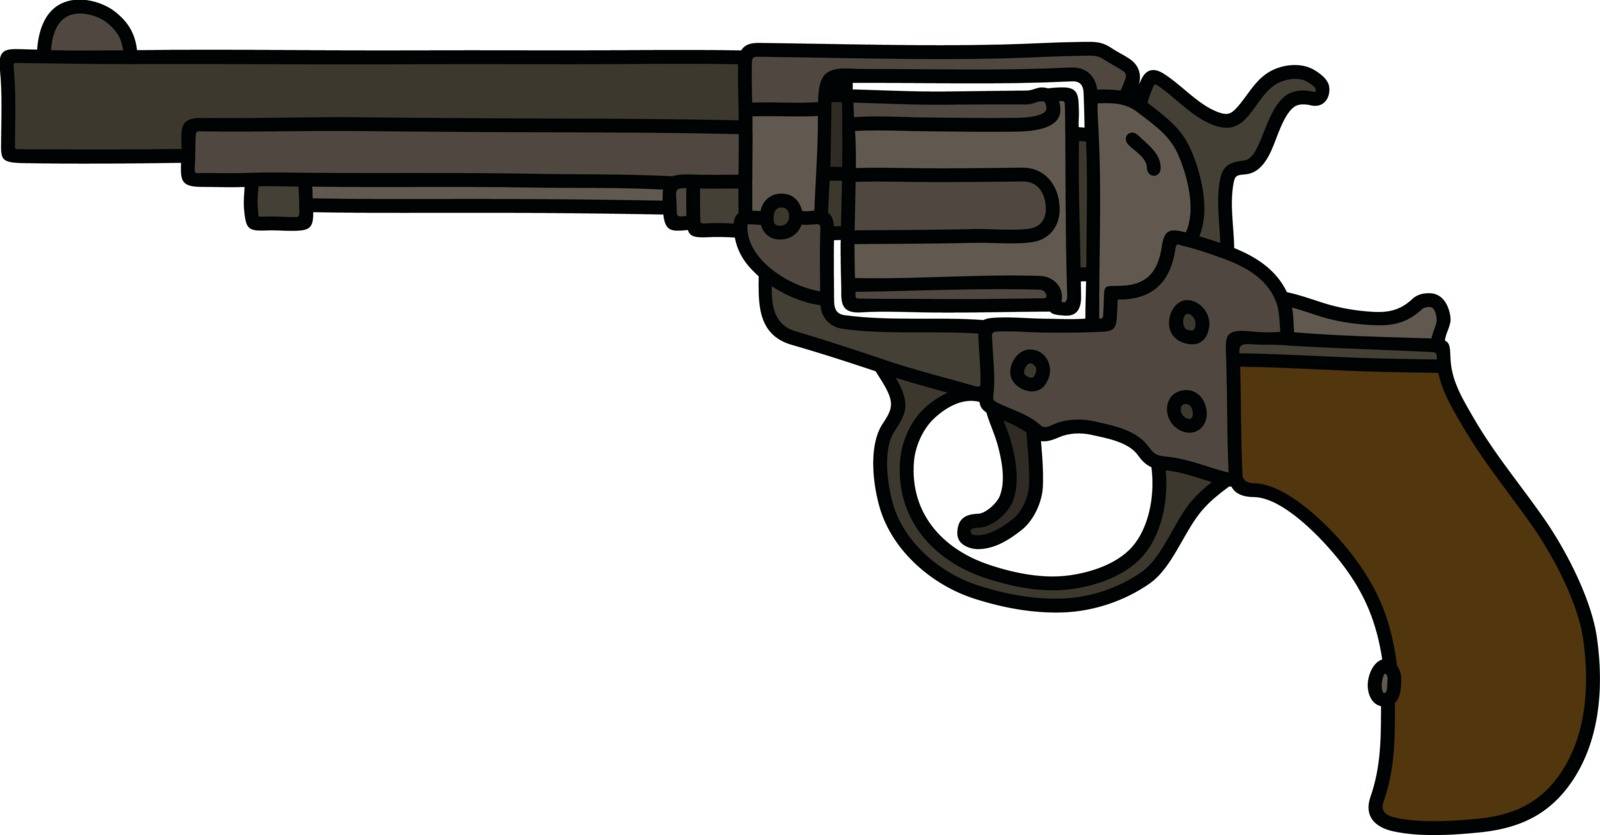 The classic revolver by vostal